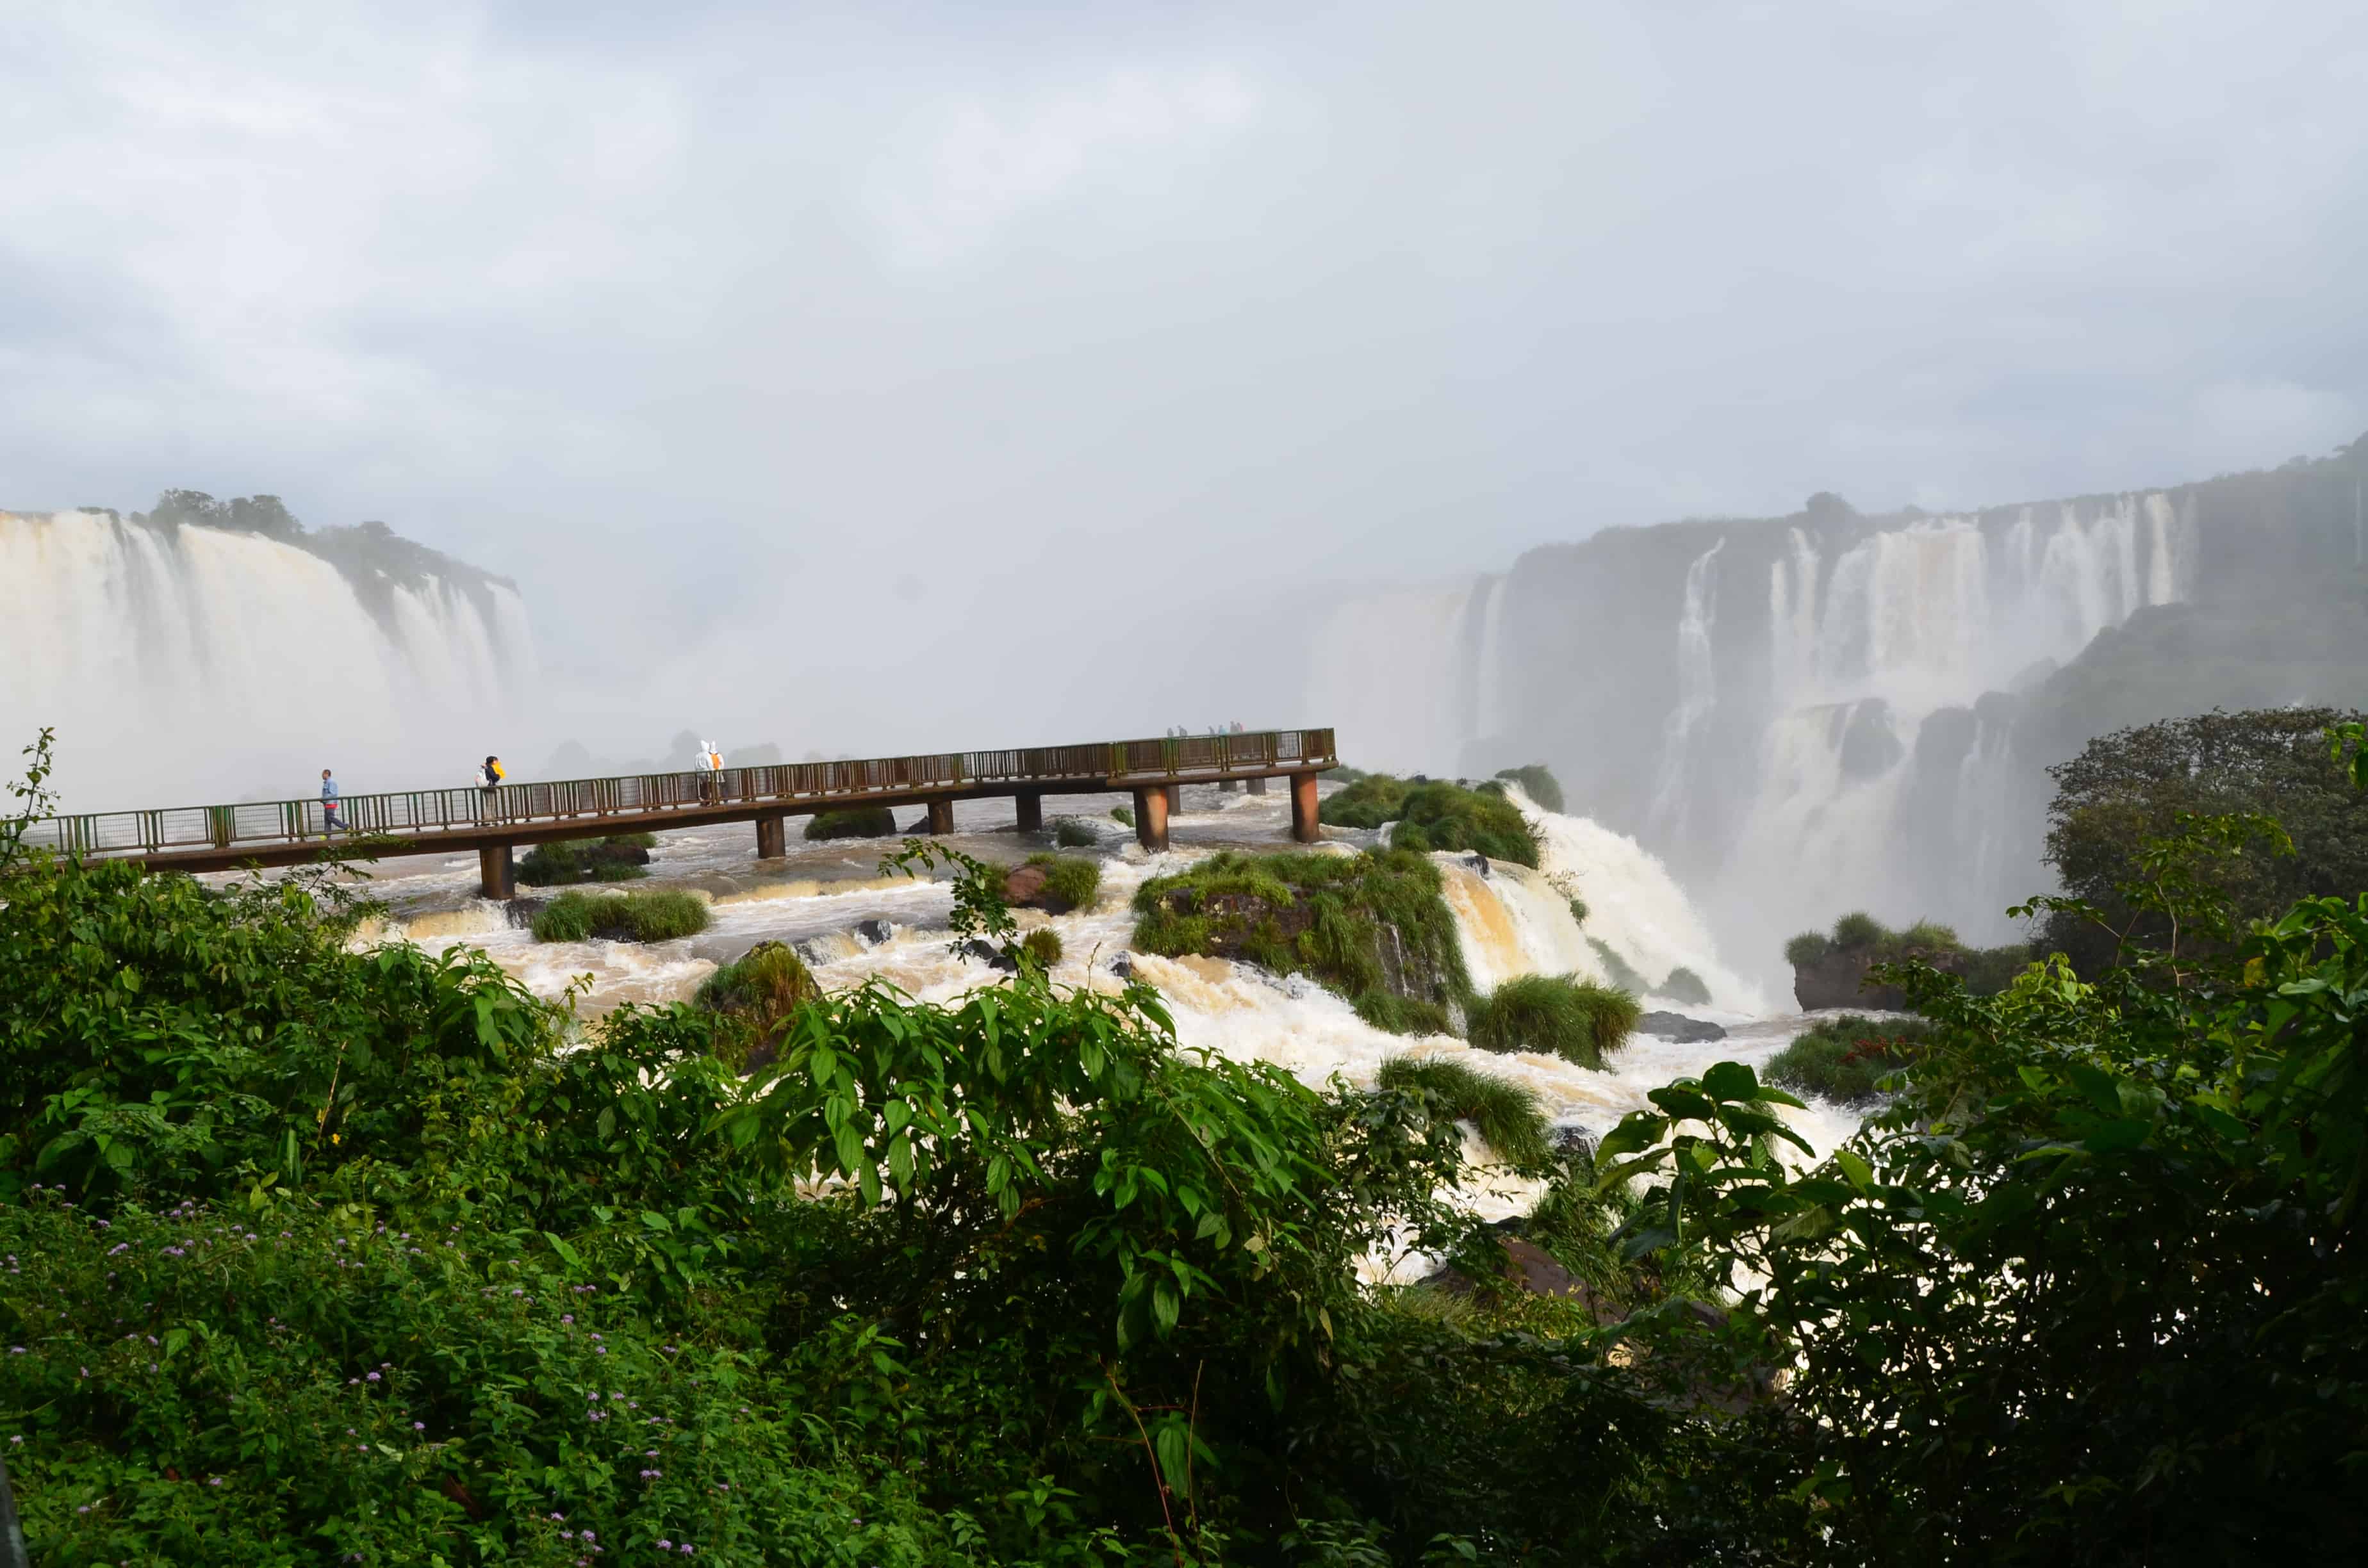 Extension to the falls at Iguaçu National Park in Brazil